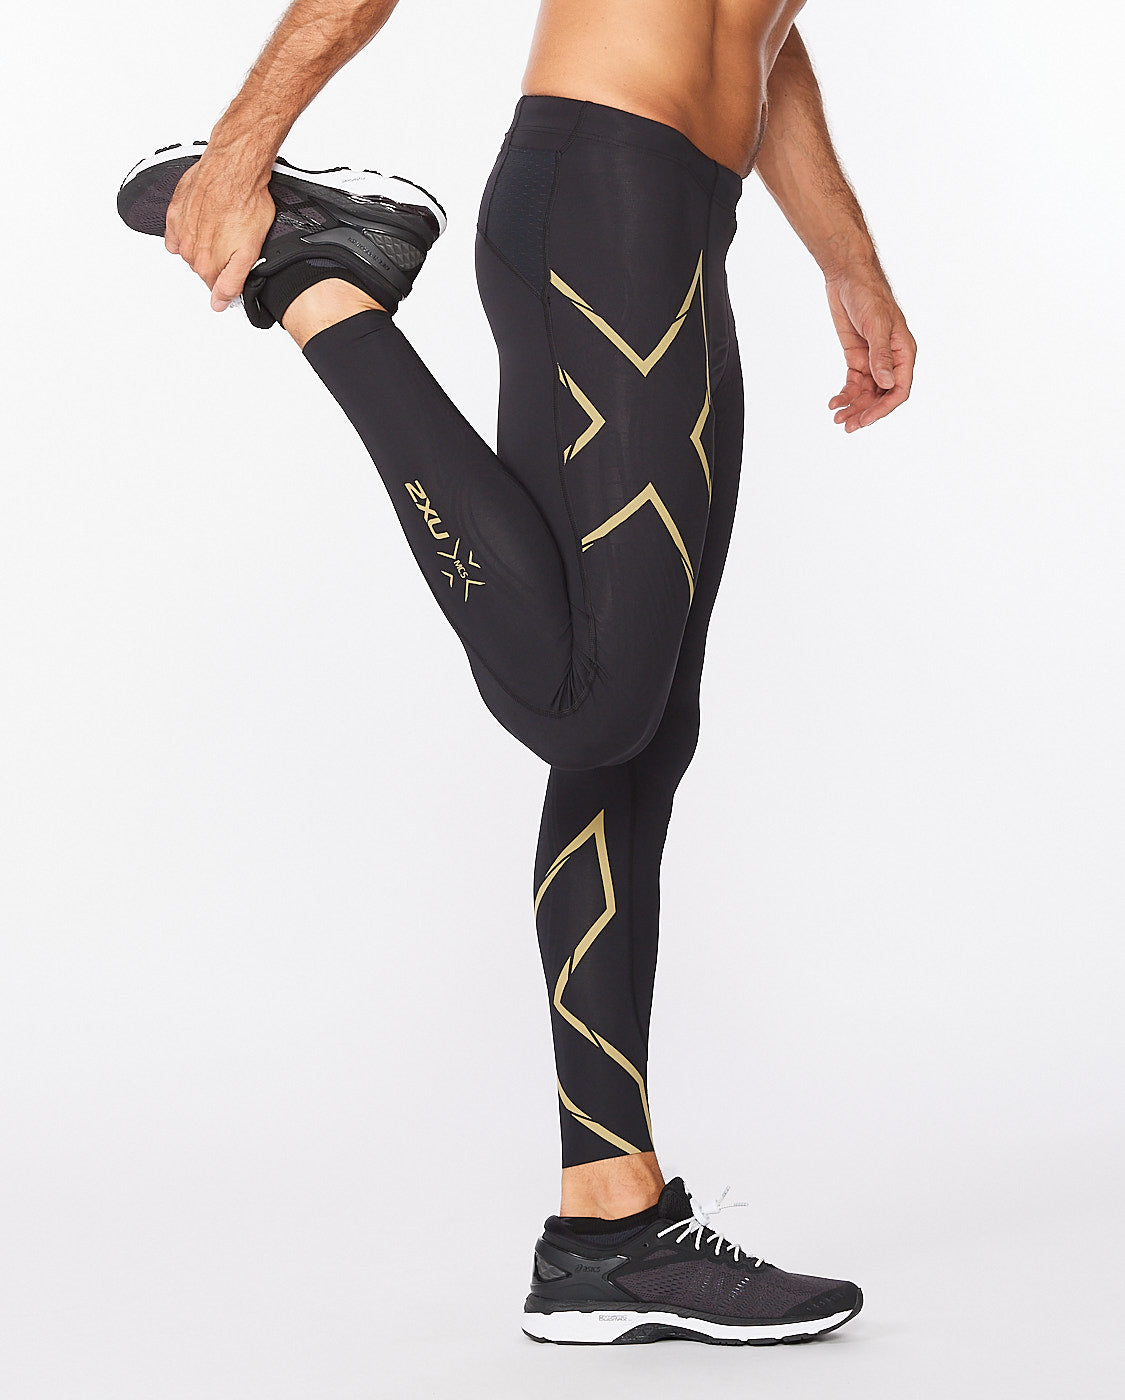 Revolutionalise your running performance with 2XU's compression